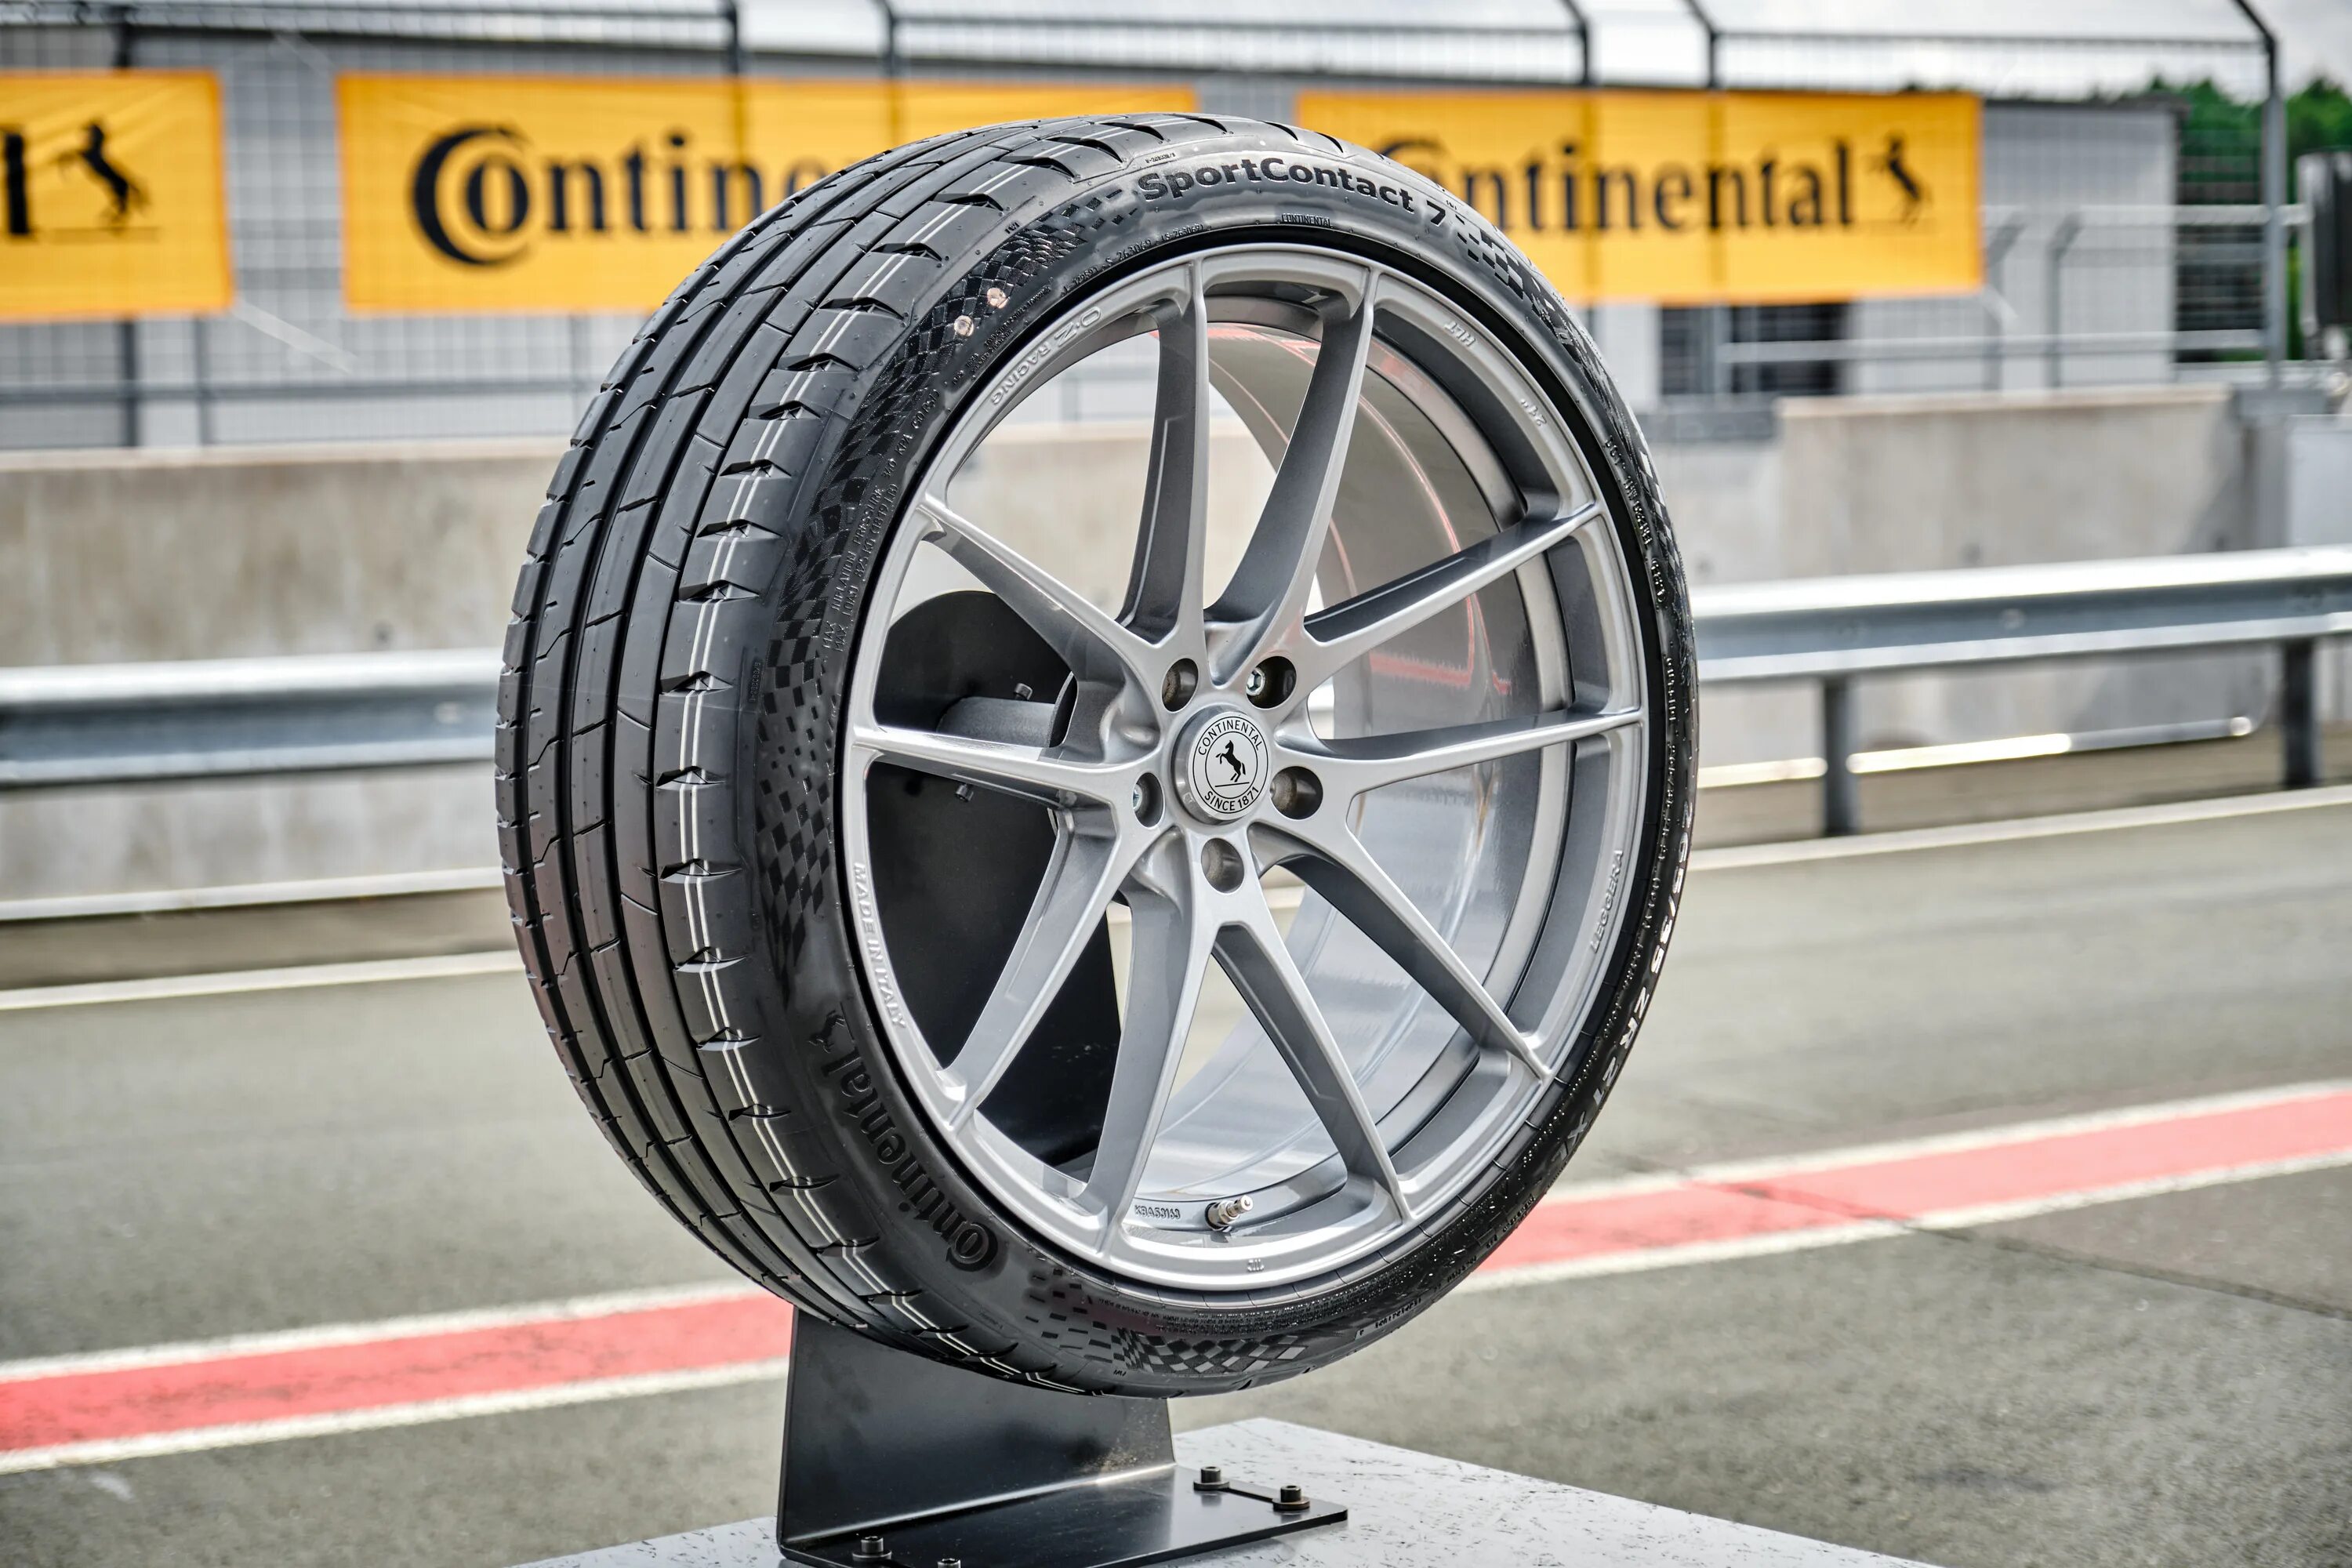 Continental SPORTCONTACT 7. Continental SPORTCONTACT 7 275 40 22. Continental SPORTCONTACT 6 225 40 255 35. 275/40 R22 Continental SPORTCONTACT 7 107y XL fr.